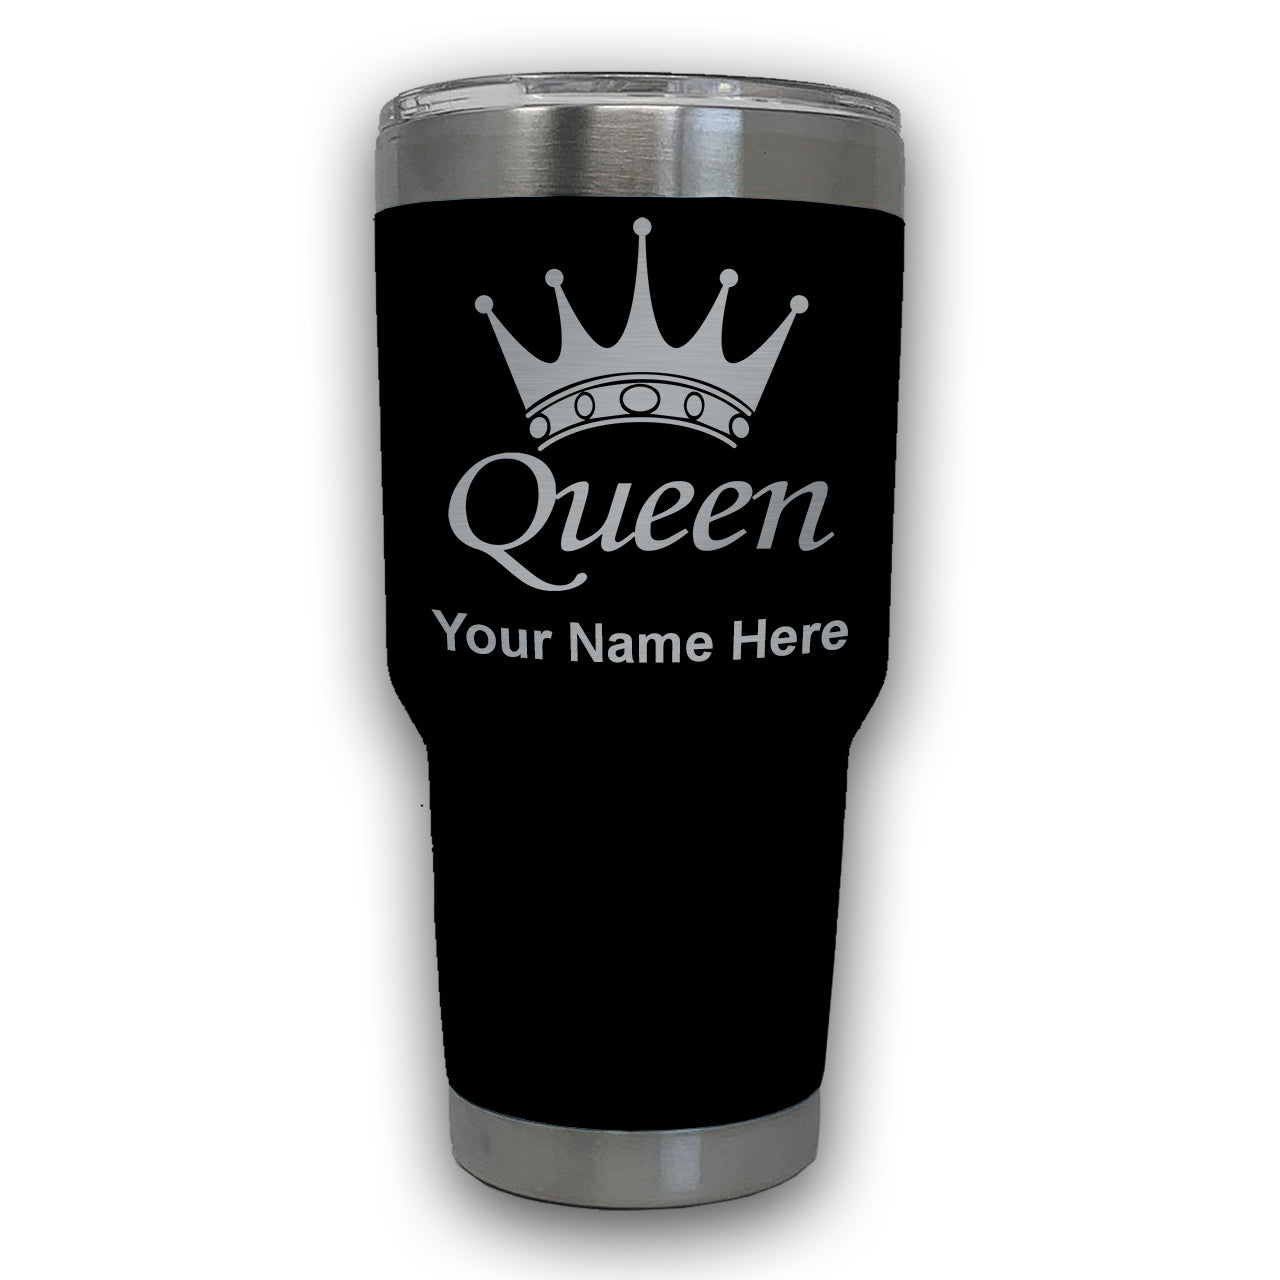 LaserGram 30oz Tumbler Mug, Queen Crown, Personalized Engraving Included